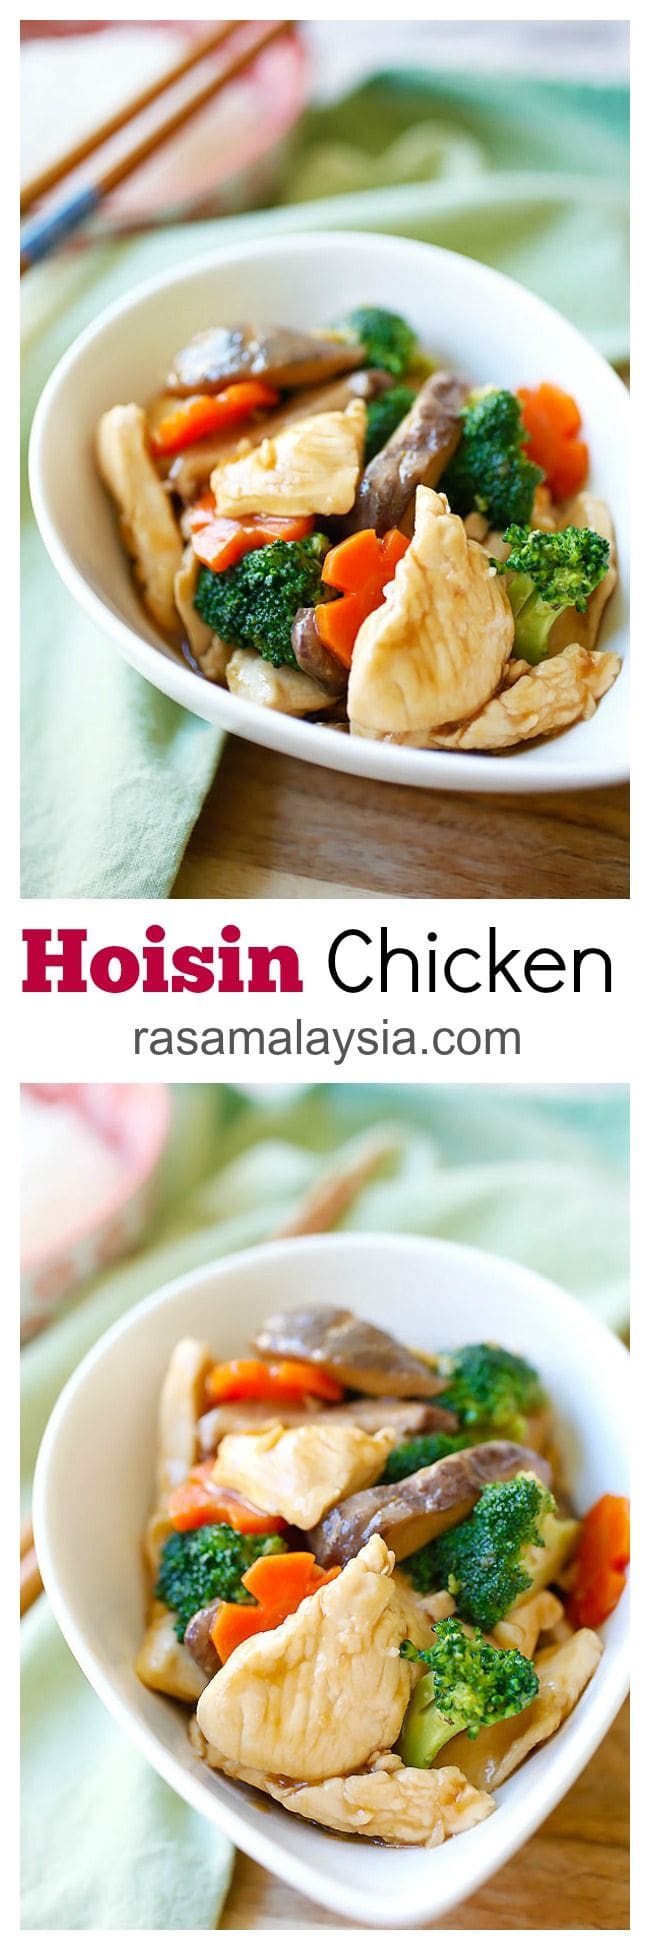 Hoisin chicken – easy chicken stir-fry with vegetables in a savory Hoisin sauce. This recipe takes 20 minutes with easy-to-get store ingredients | rasamalaysia.com